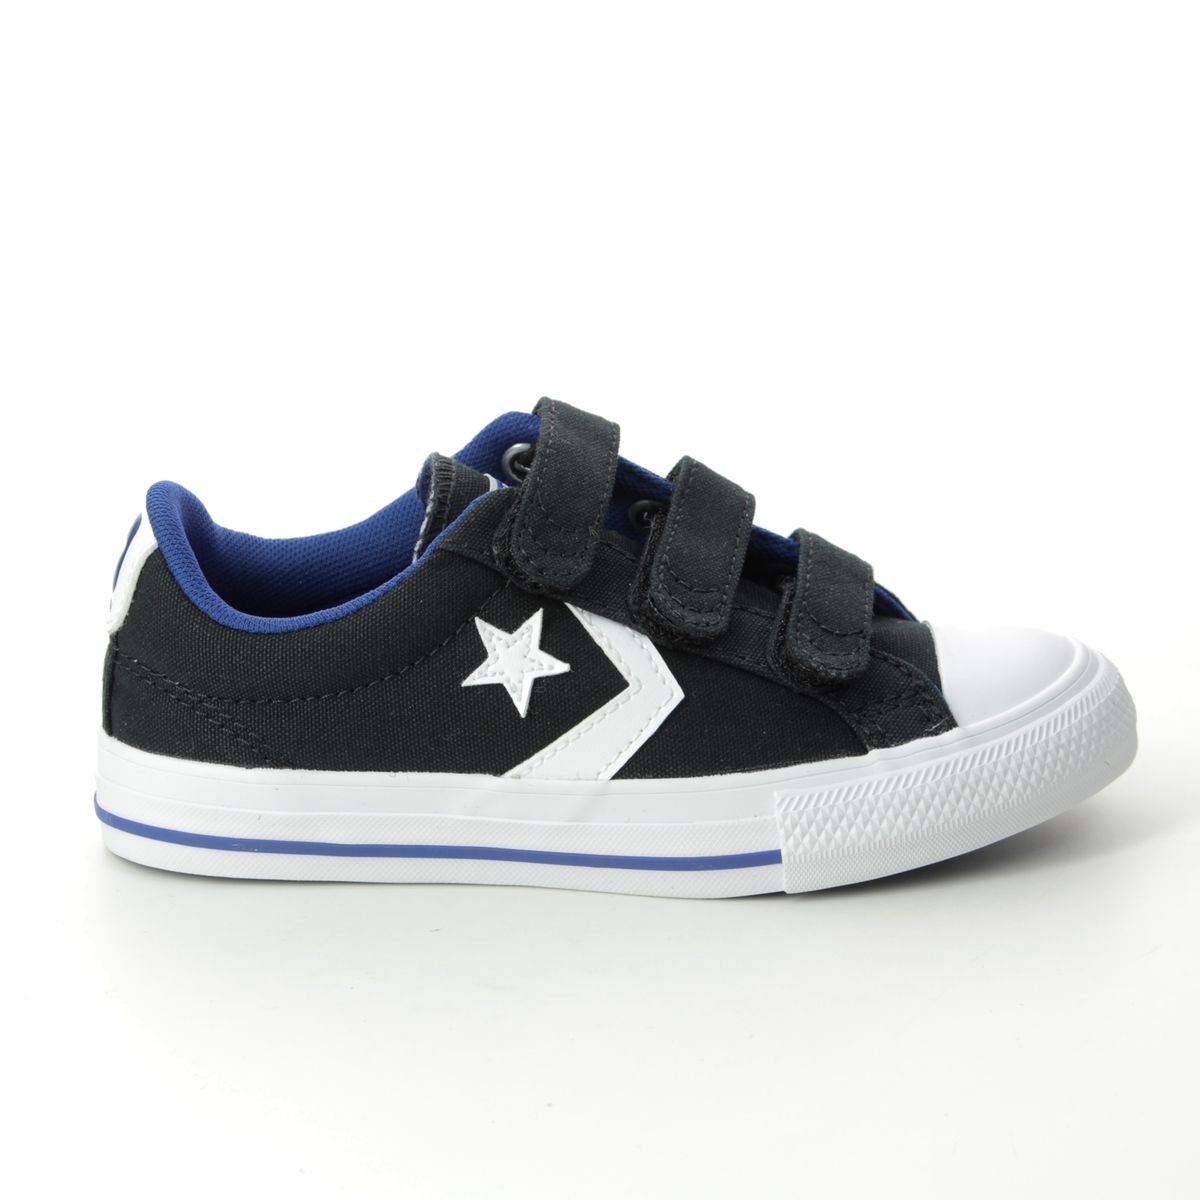 Converse Star Player 3v 666948C-003 Black trainers